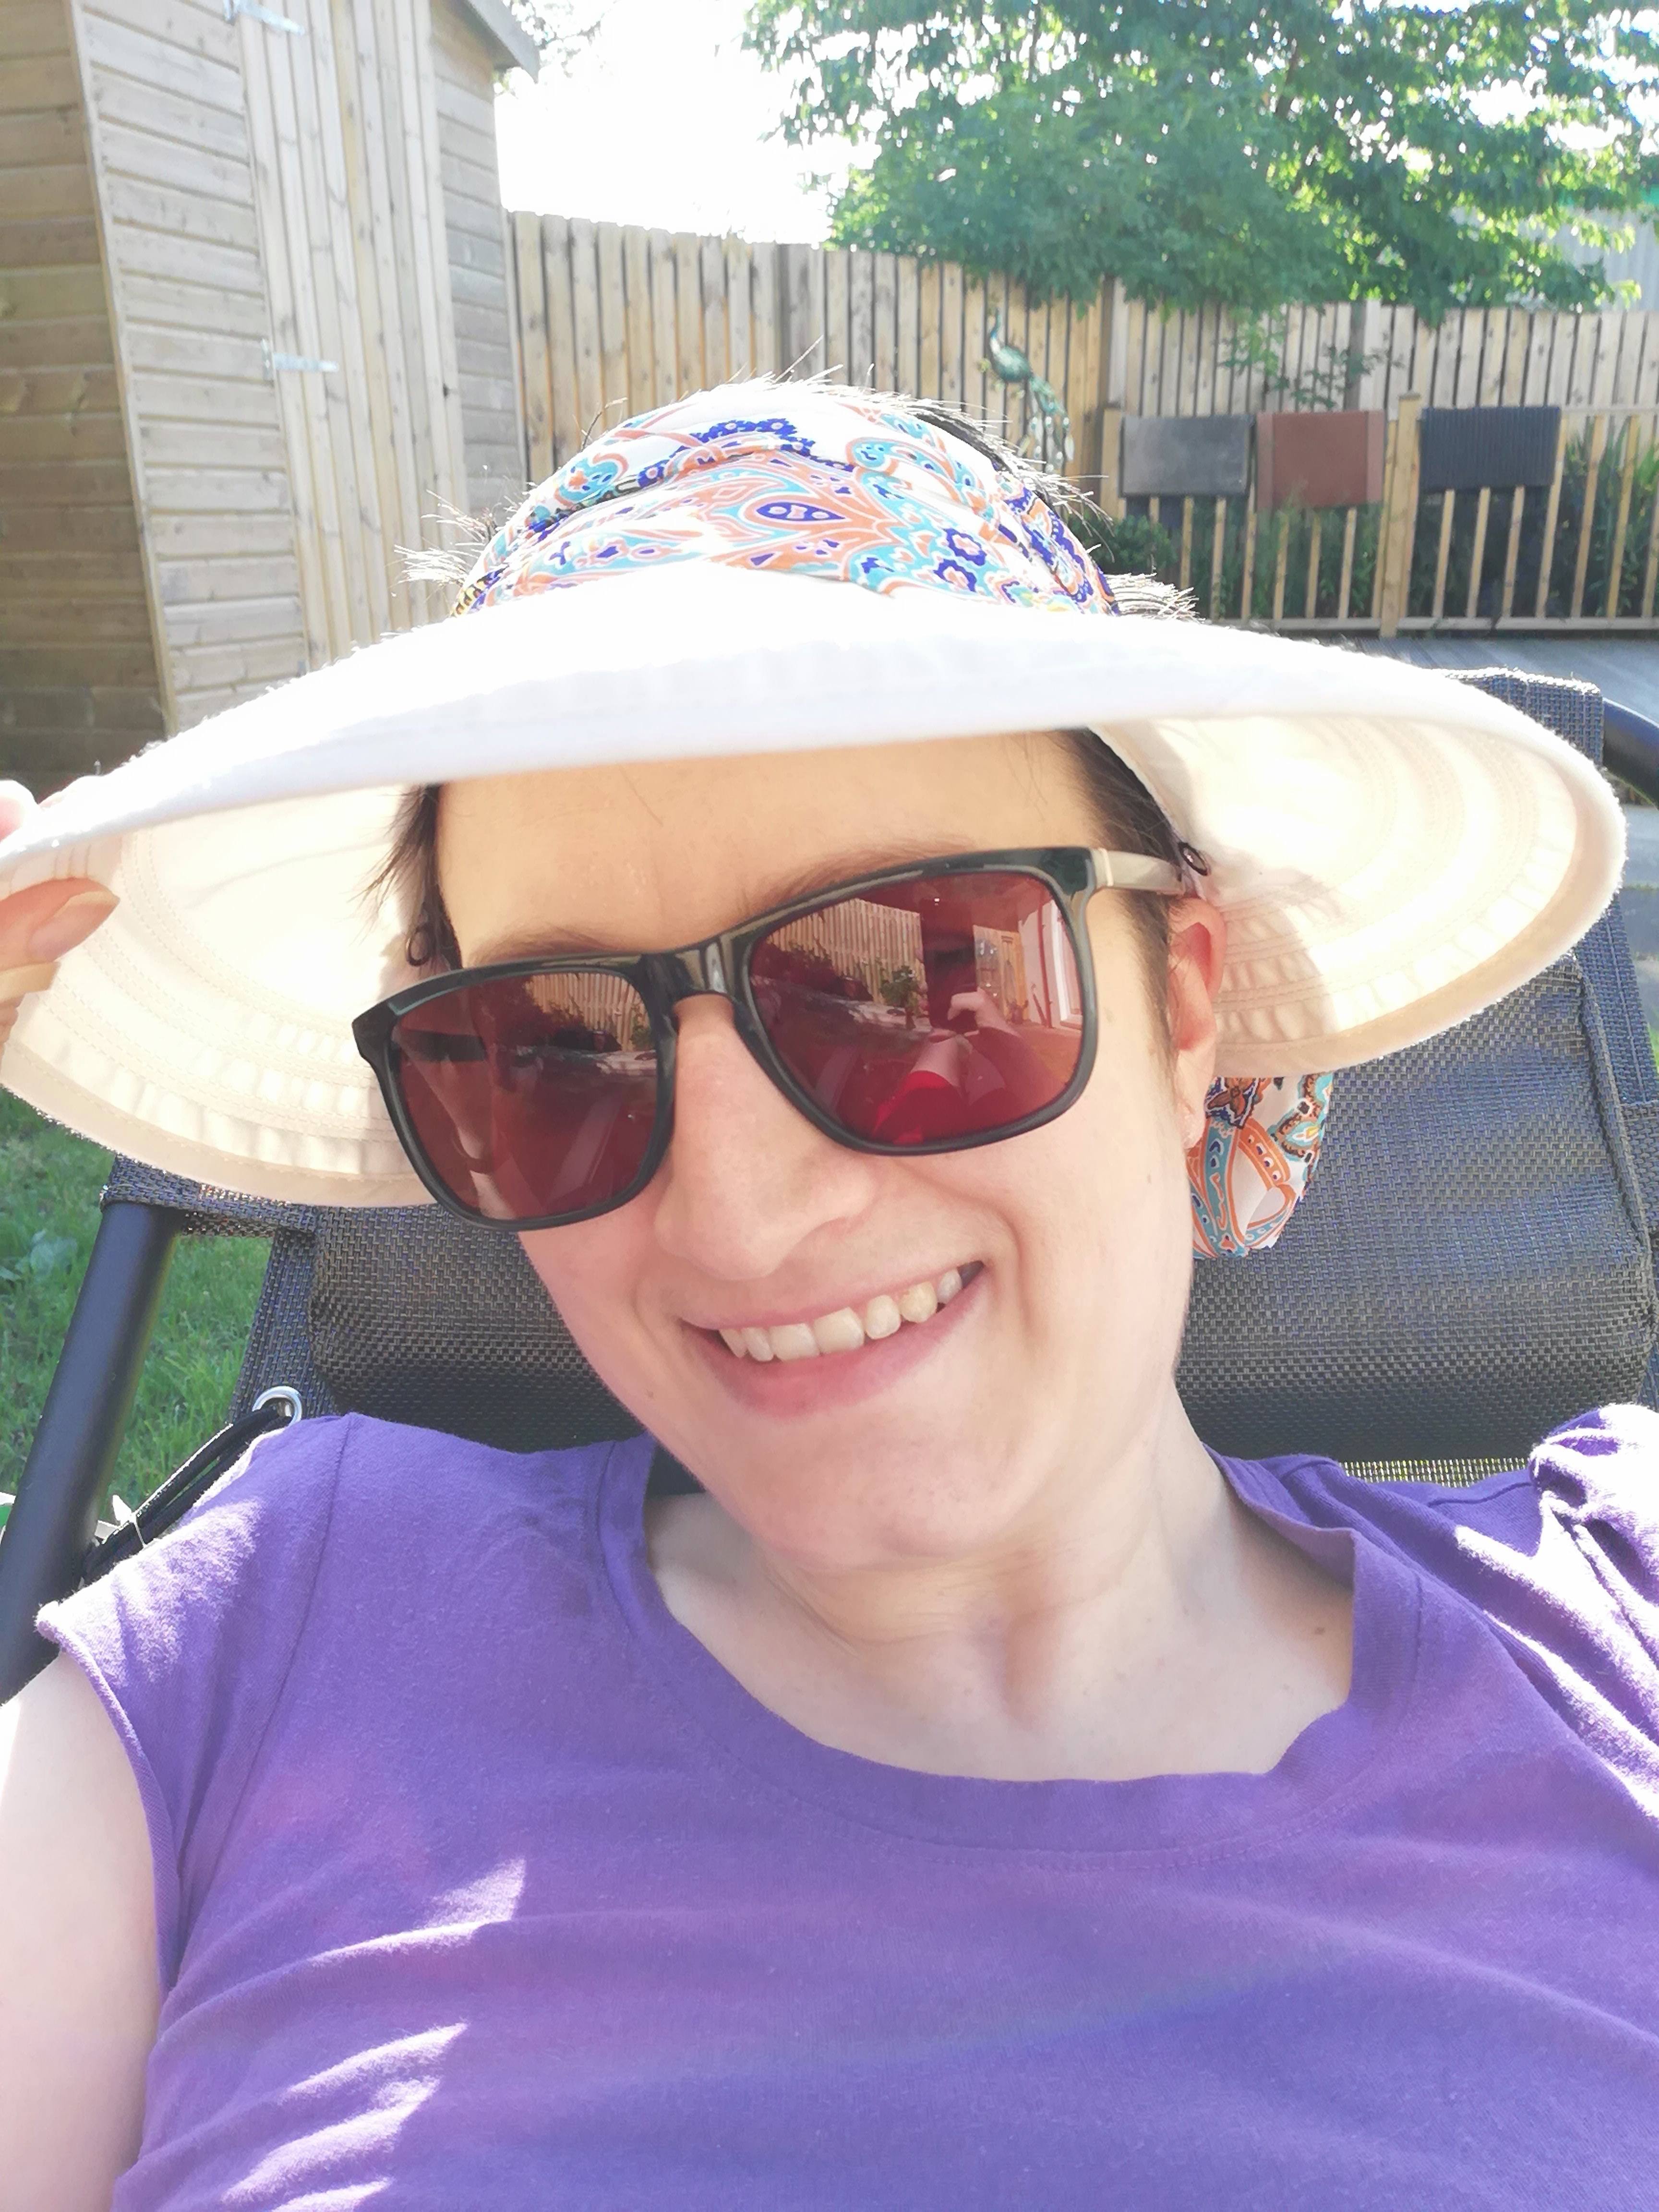 Char lying on garden recliner. She's wearing a sun hat and sunglasses